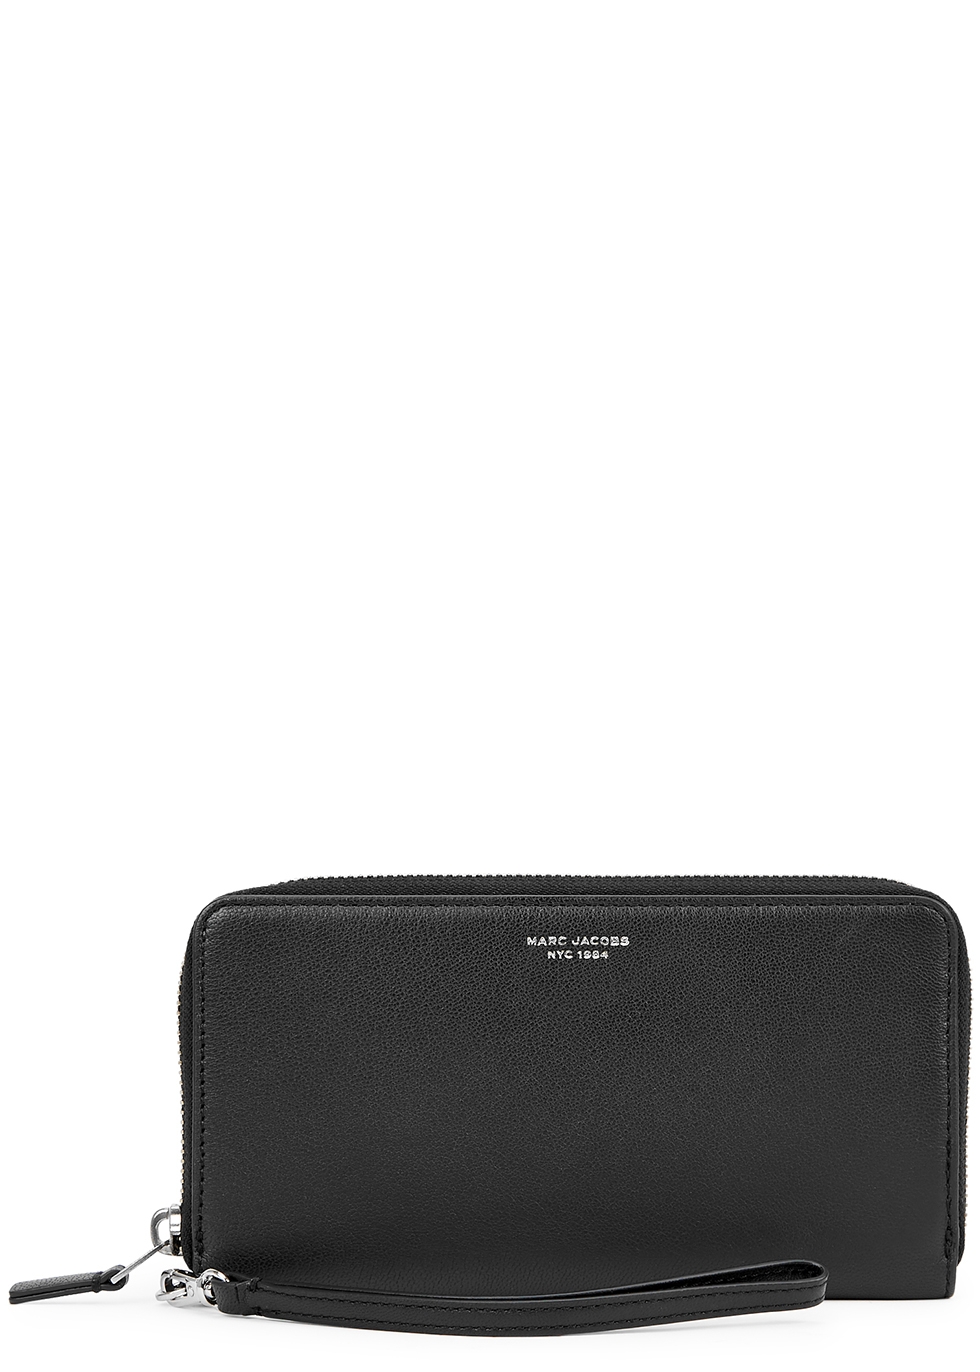 Marc Jacobs Slim 84 Continental black leather wallet